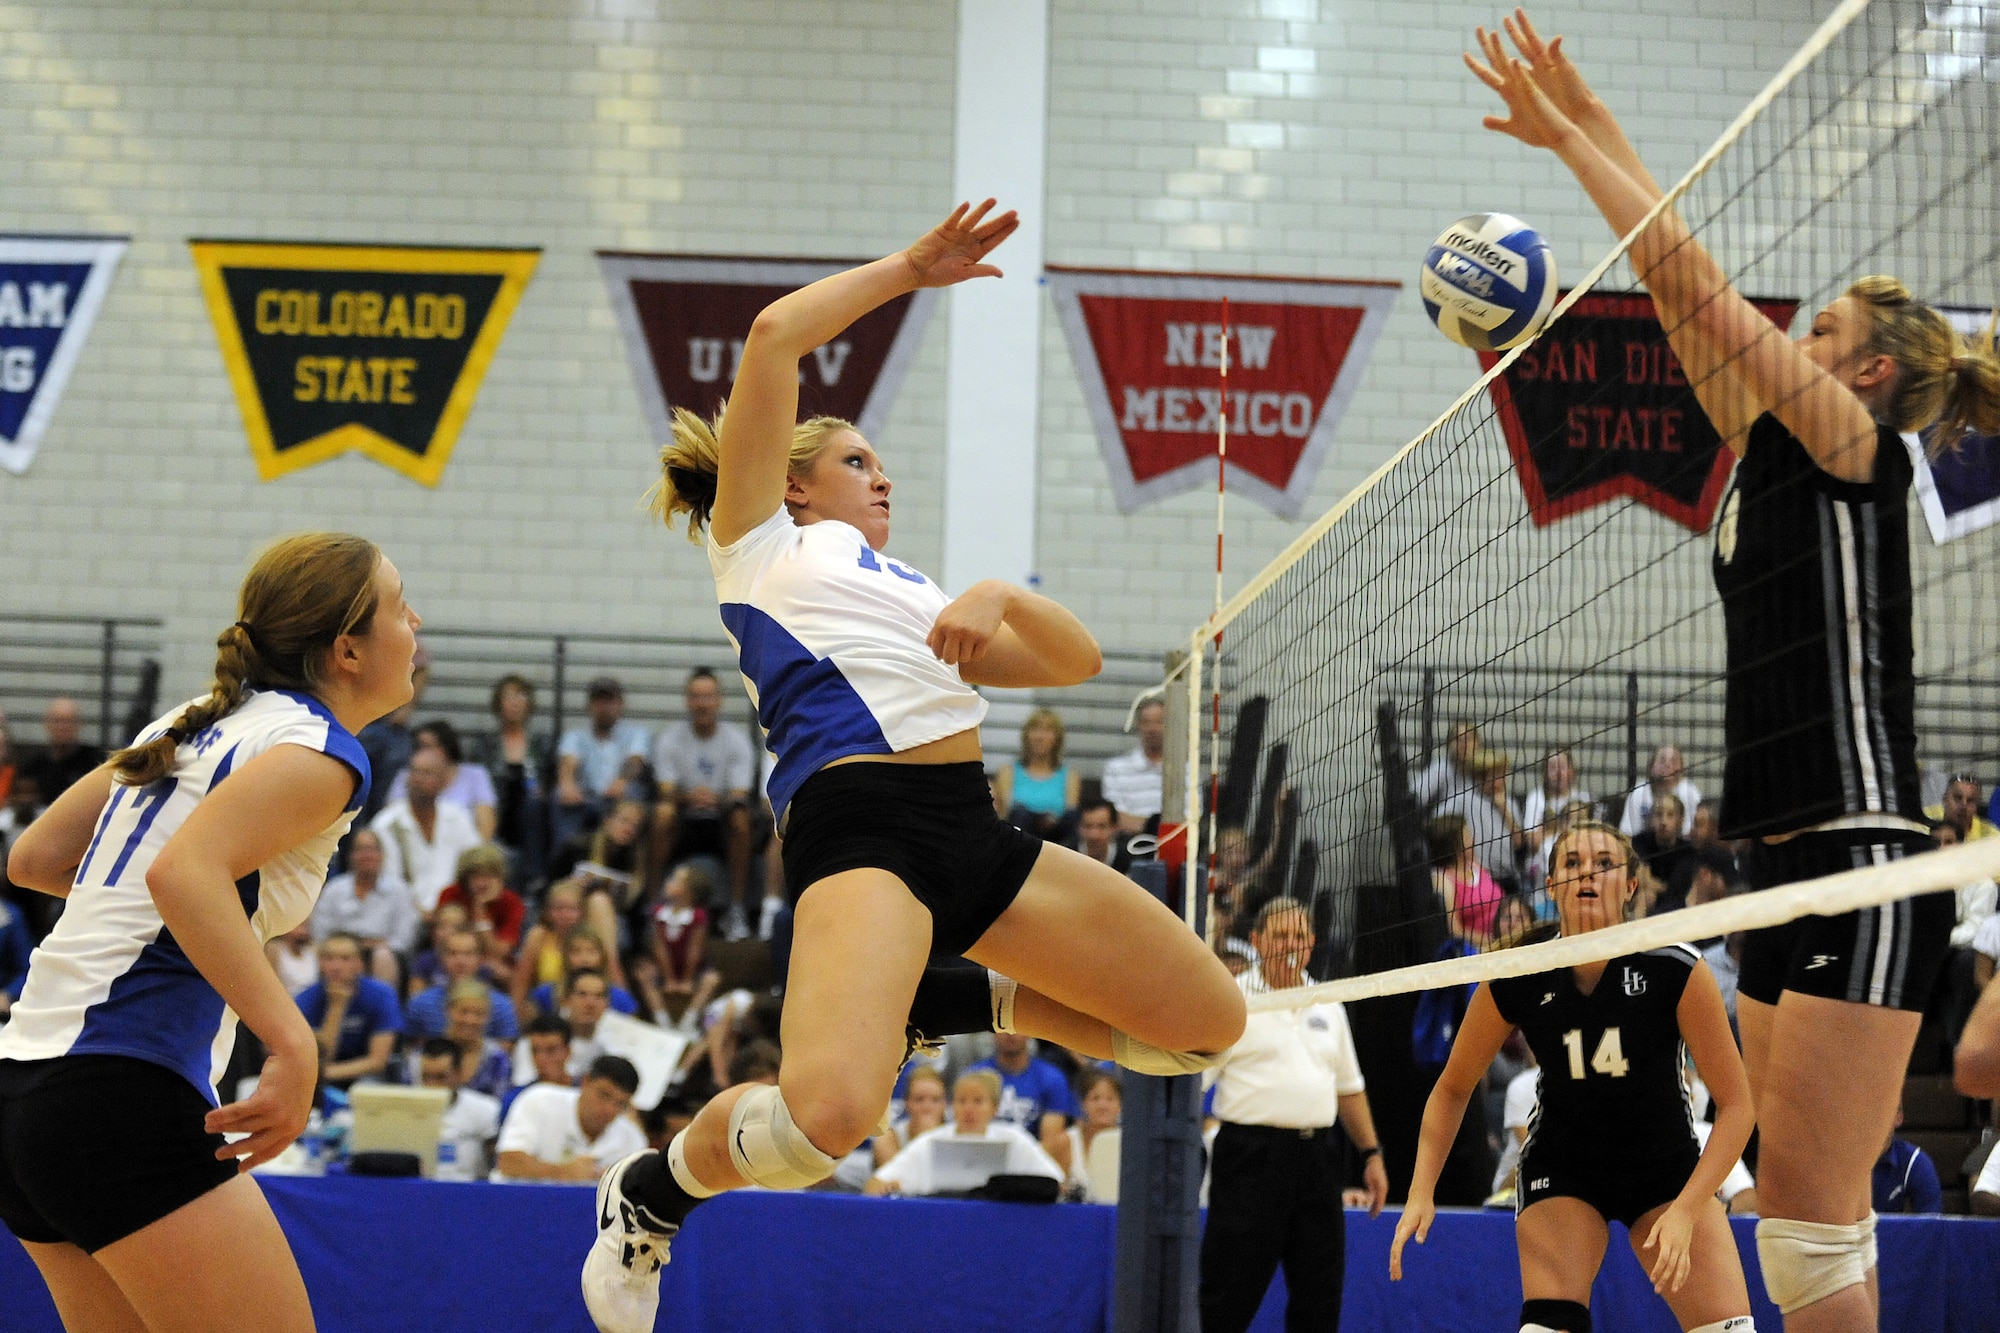 Falcon Caitie Campbell tries to spike the ball over the net during the second game of their season opener against Long Island College Aug. 27, 2010, at the U.S. Air Force Academy in Colorado Springs, Colo. The Falcons won 3-2 over Long Island with scores of 25-14, 22-25, 29-31, 25-19 and 15-9. (U.S. Air Force photo/J. Rachel Spencer)
